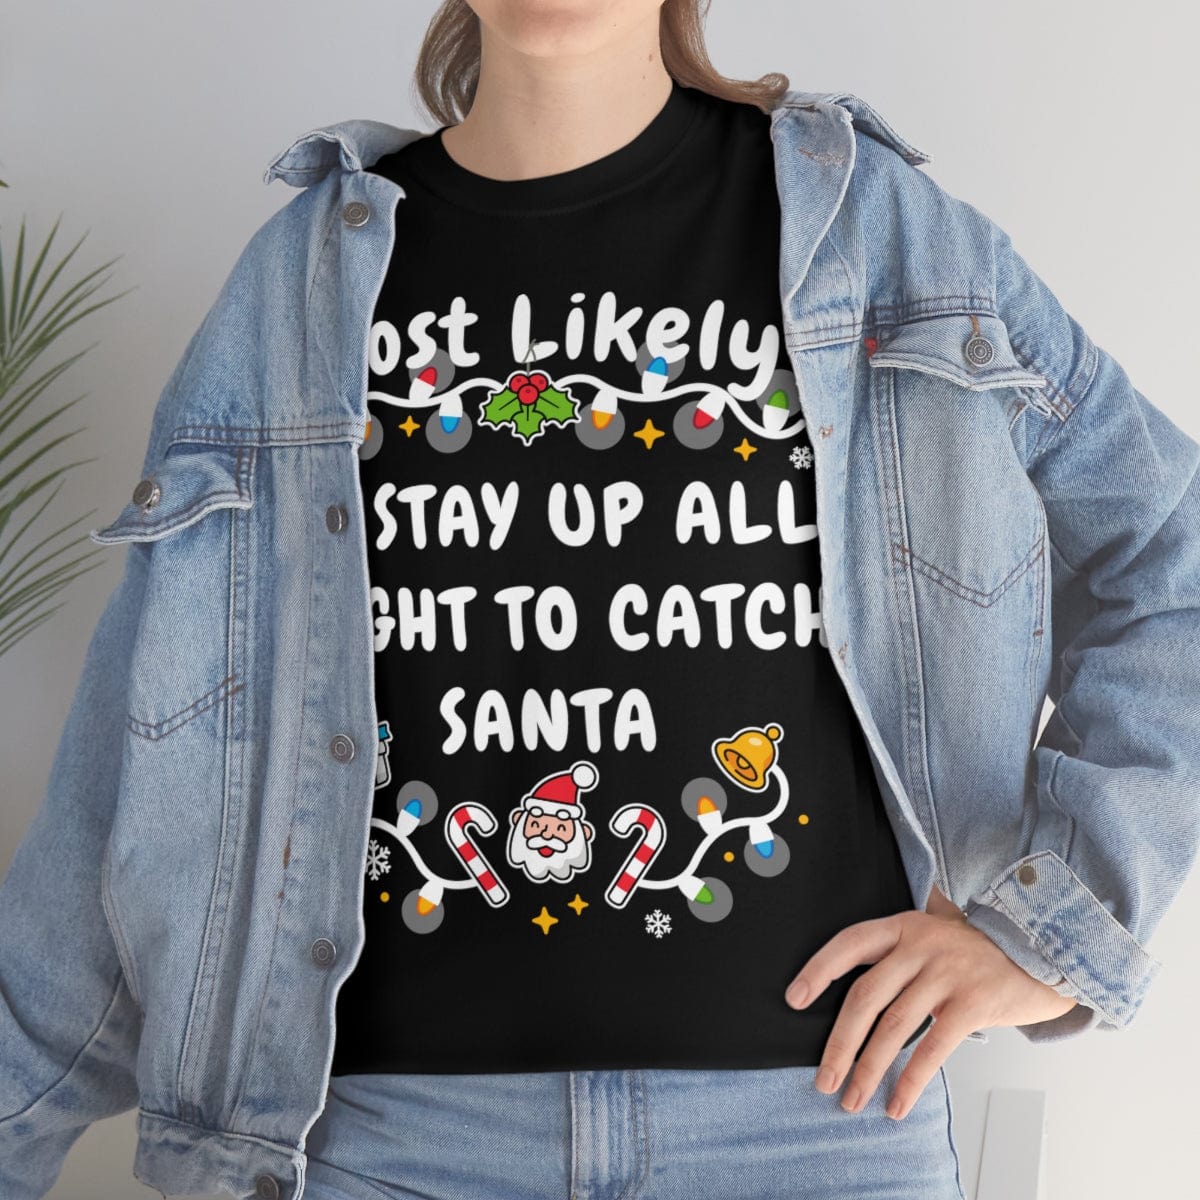 TO STAY UP ALL NIGHT TO CATCH SANTA